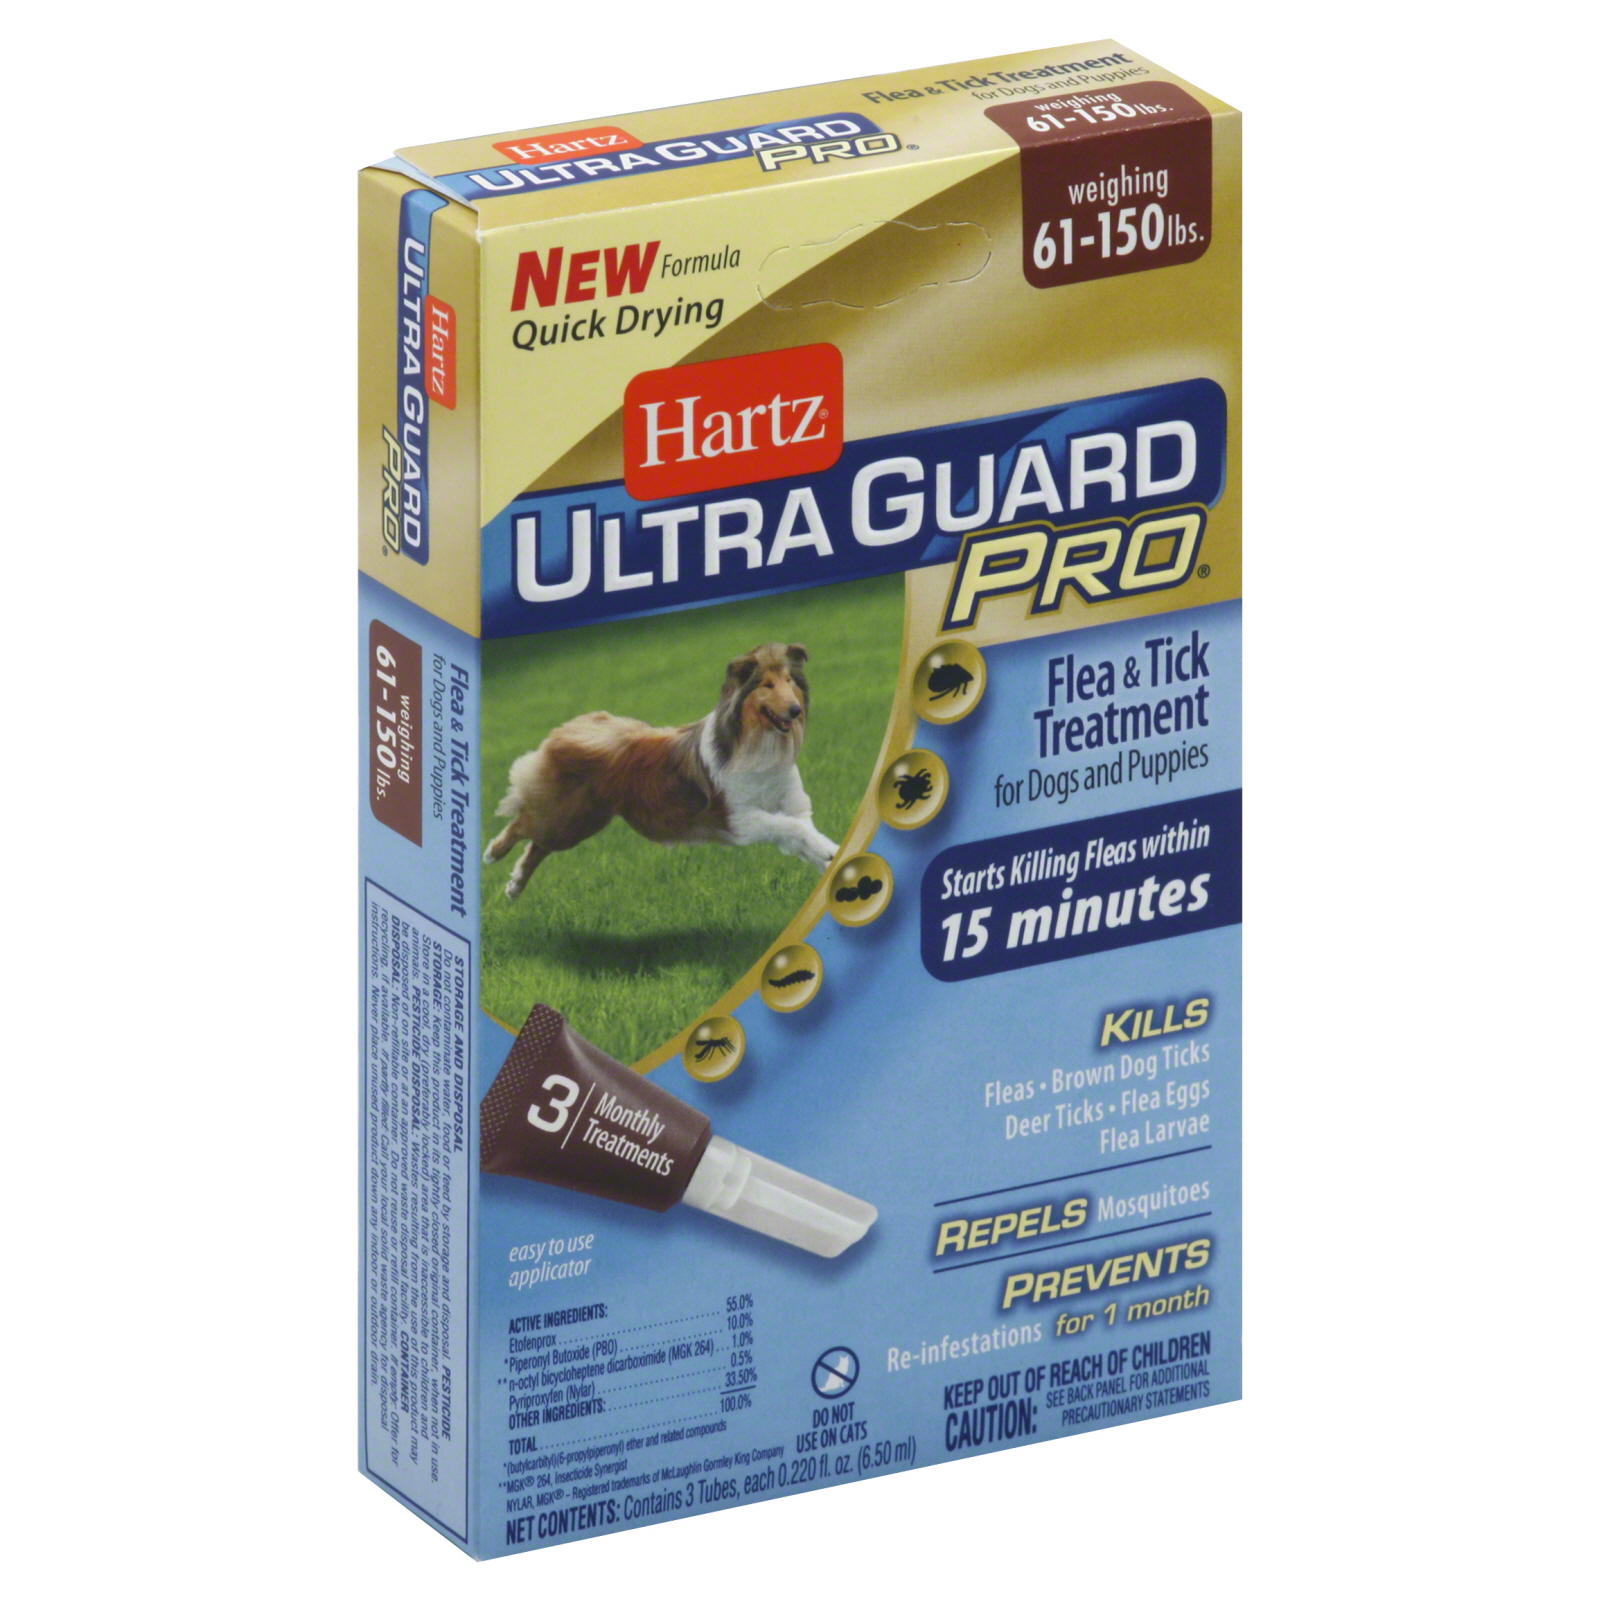 Hartz Ultra Guard Pro Flea & Tick Drops, For Dogs and Puppies Weighing Over 60 Pounds, 3- 0.20 fl oz (5.9 ml) tube applicators